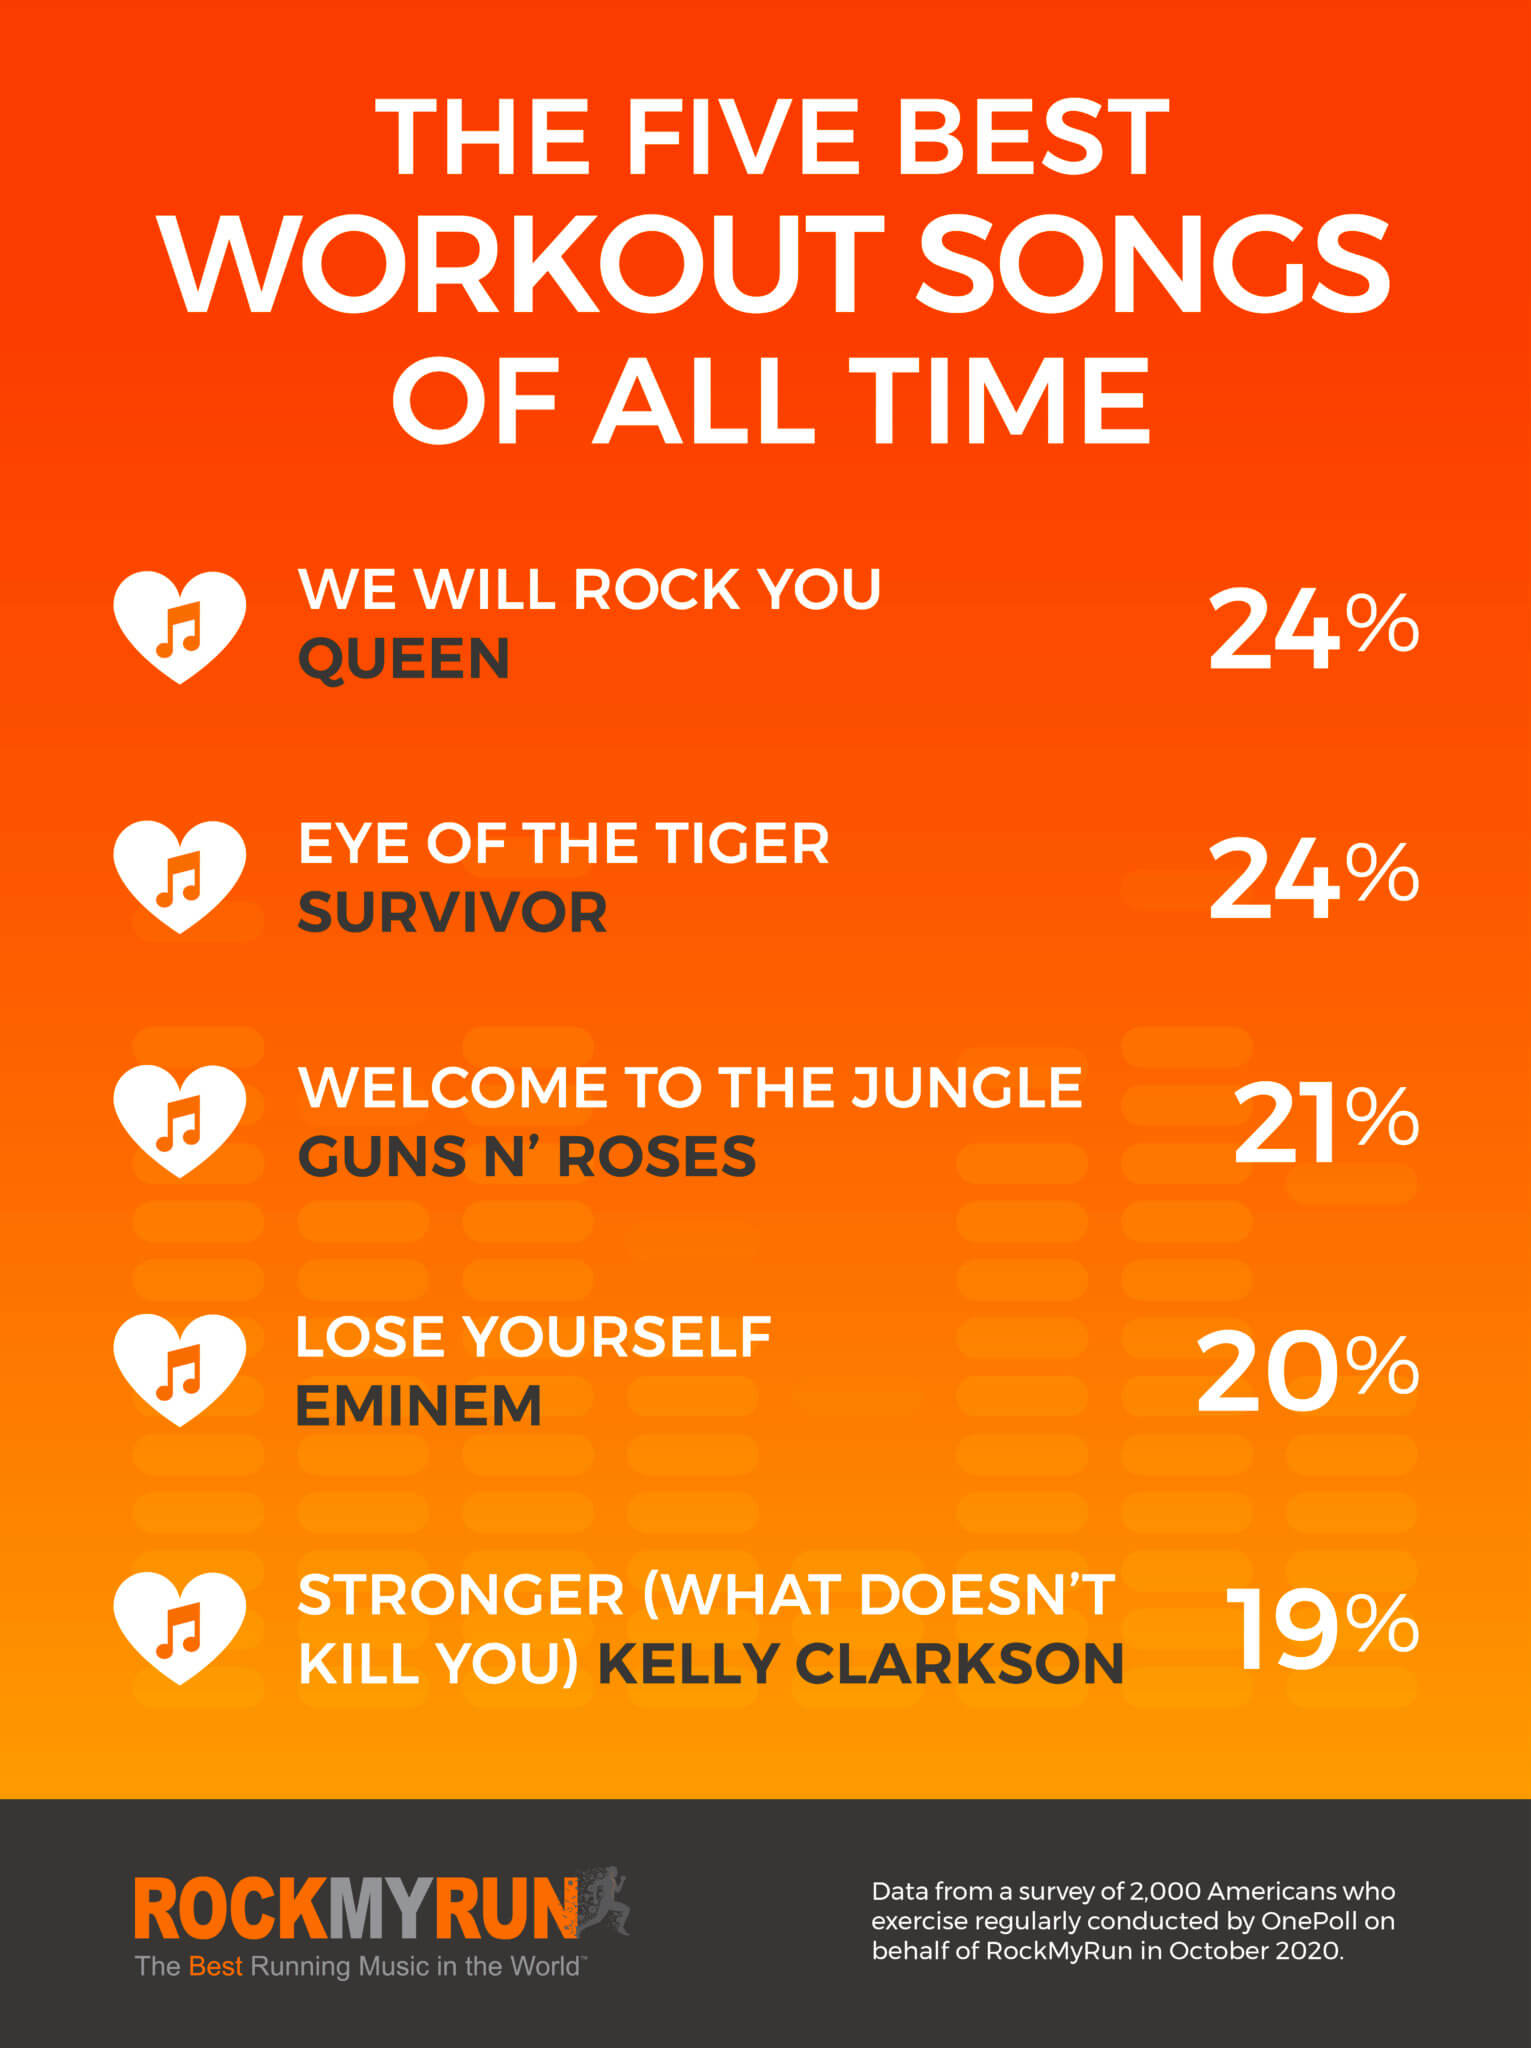 'We Will Rock You,' 'Eye Of The Tiger' top list of best workout songs